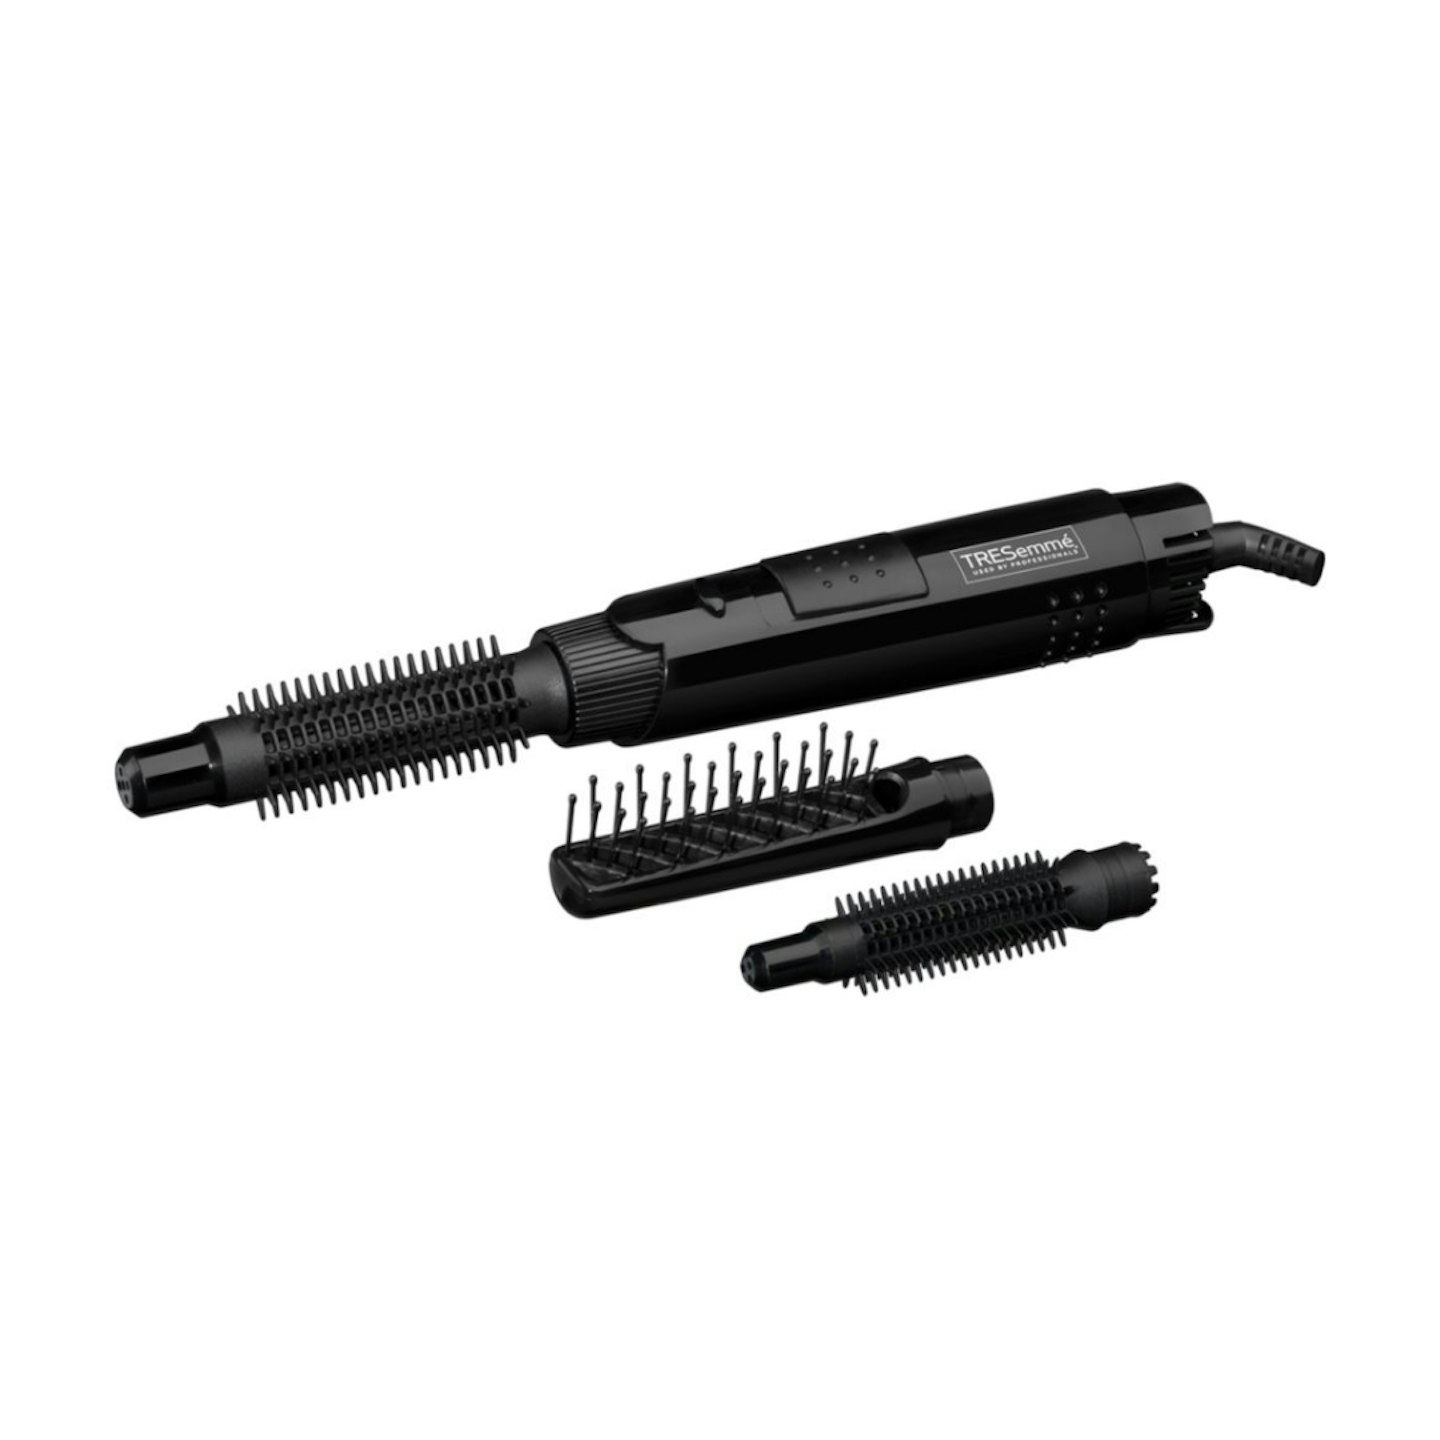 TRESemmé Full Finish Airstyler - 3 Interchangeable brushes